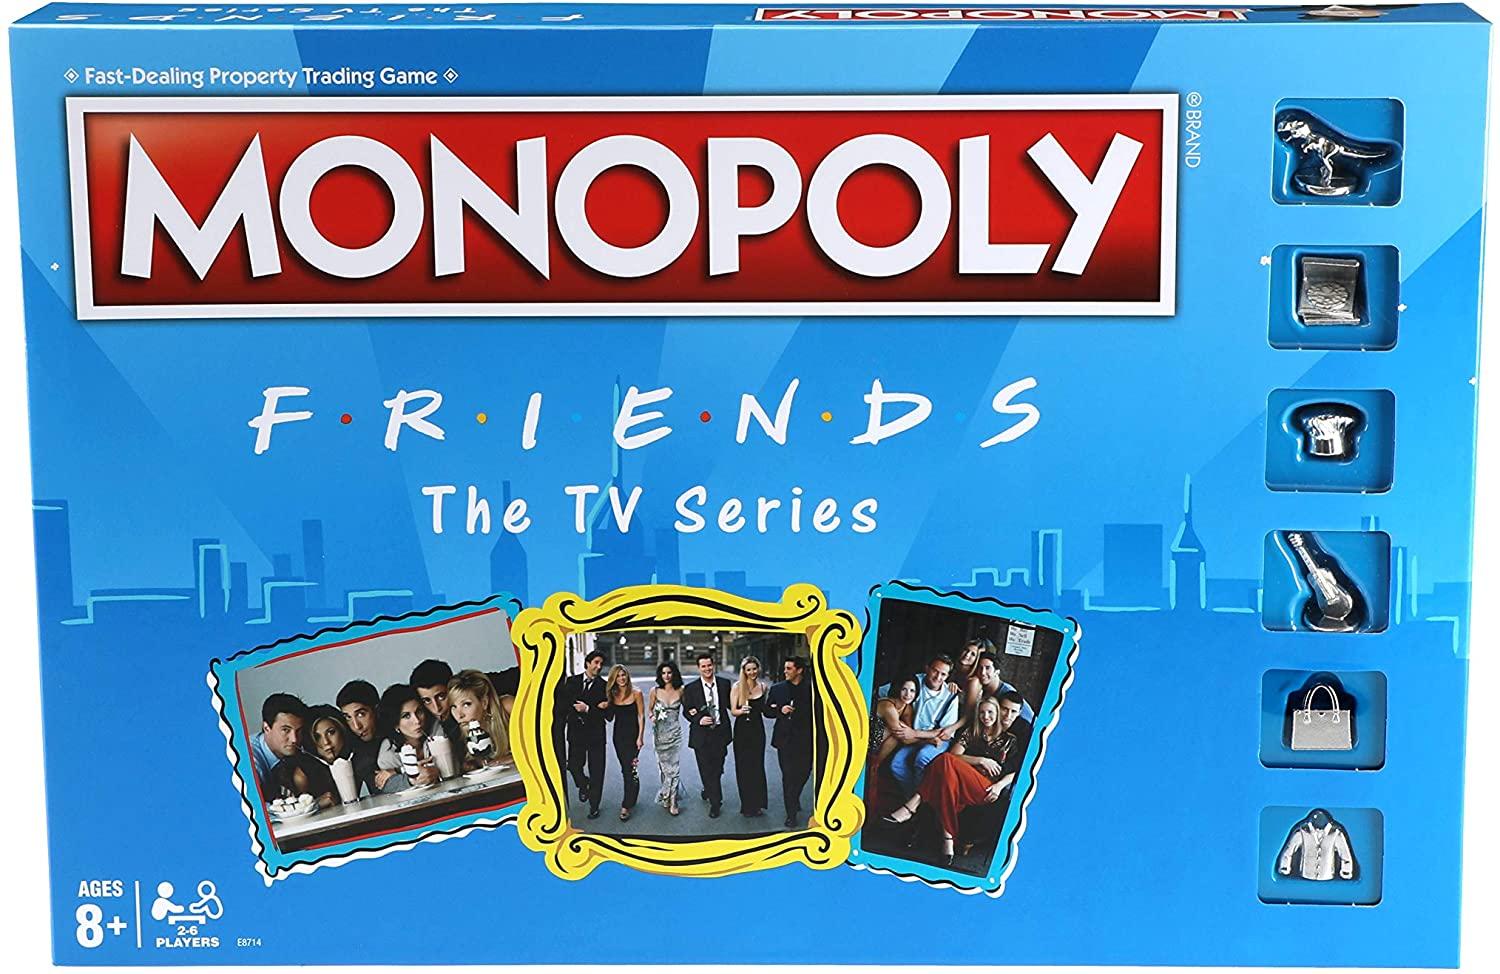 Monopoly Friends The TV Series Edition for $17.49